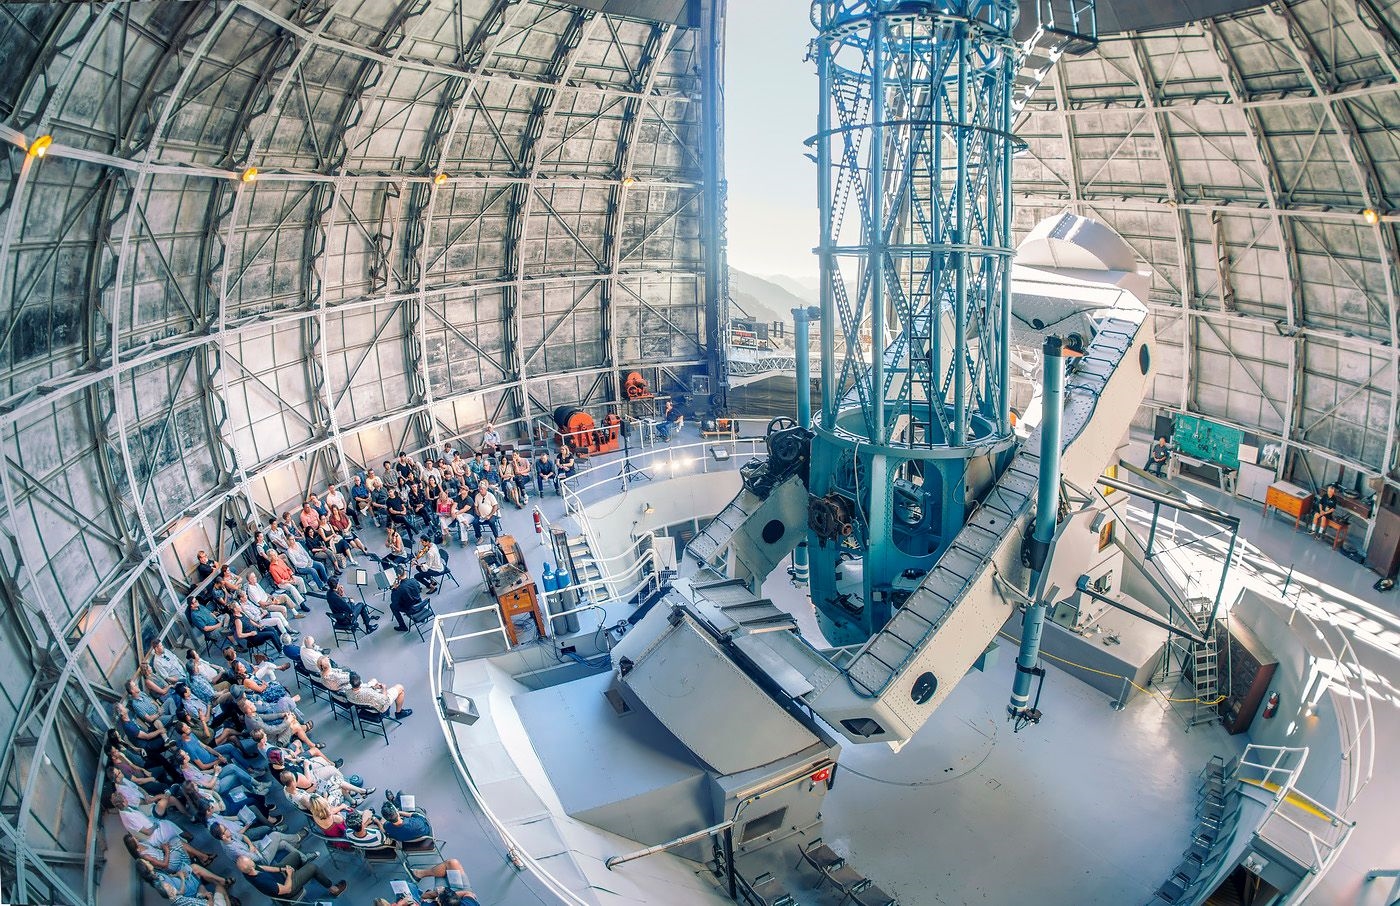 Mt. Wilson Observatory's Concerts in the Dome